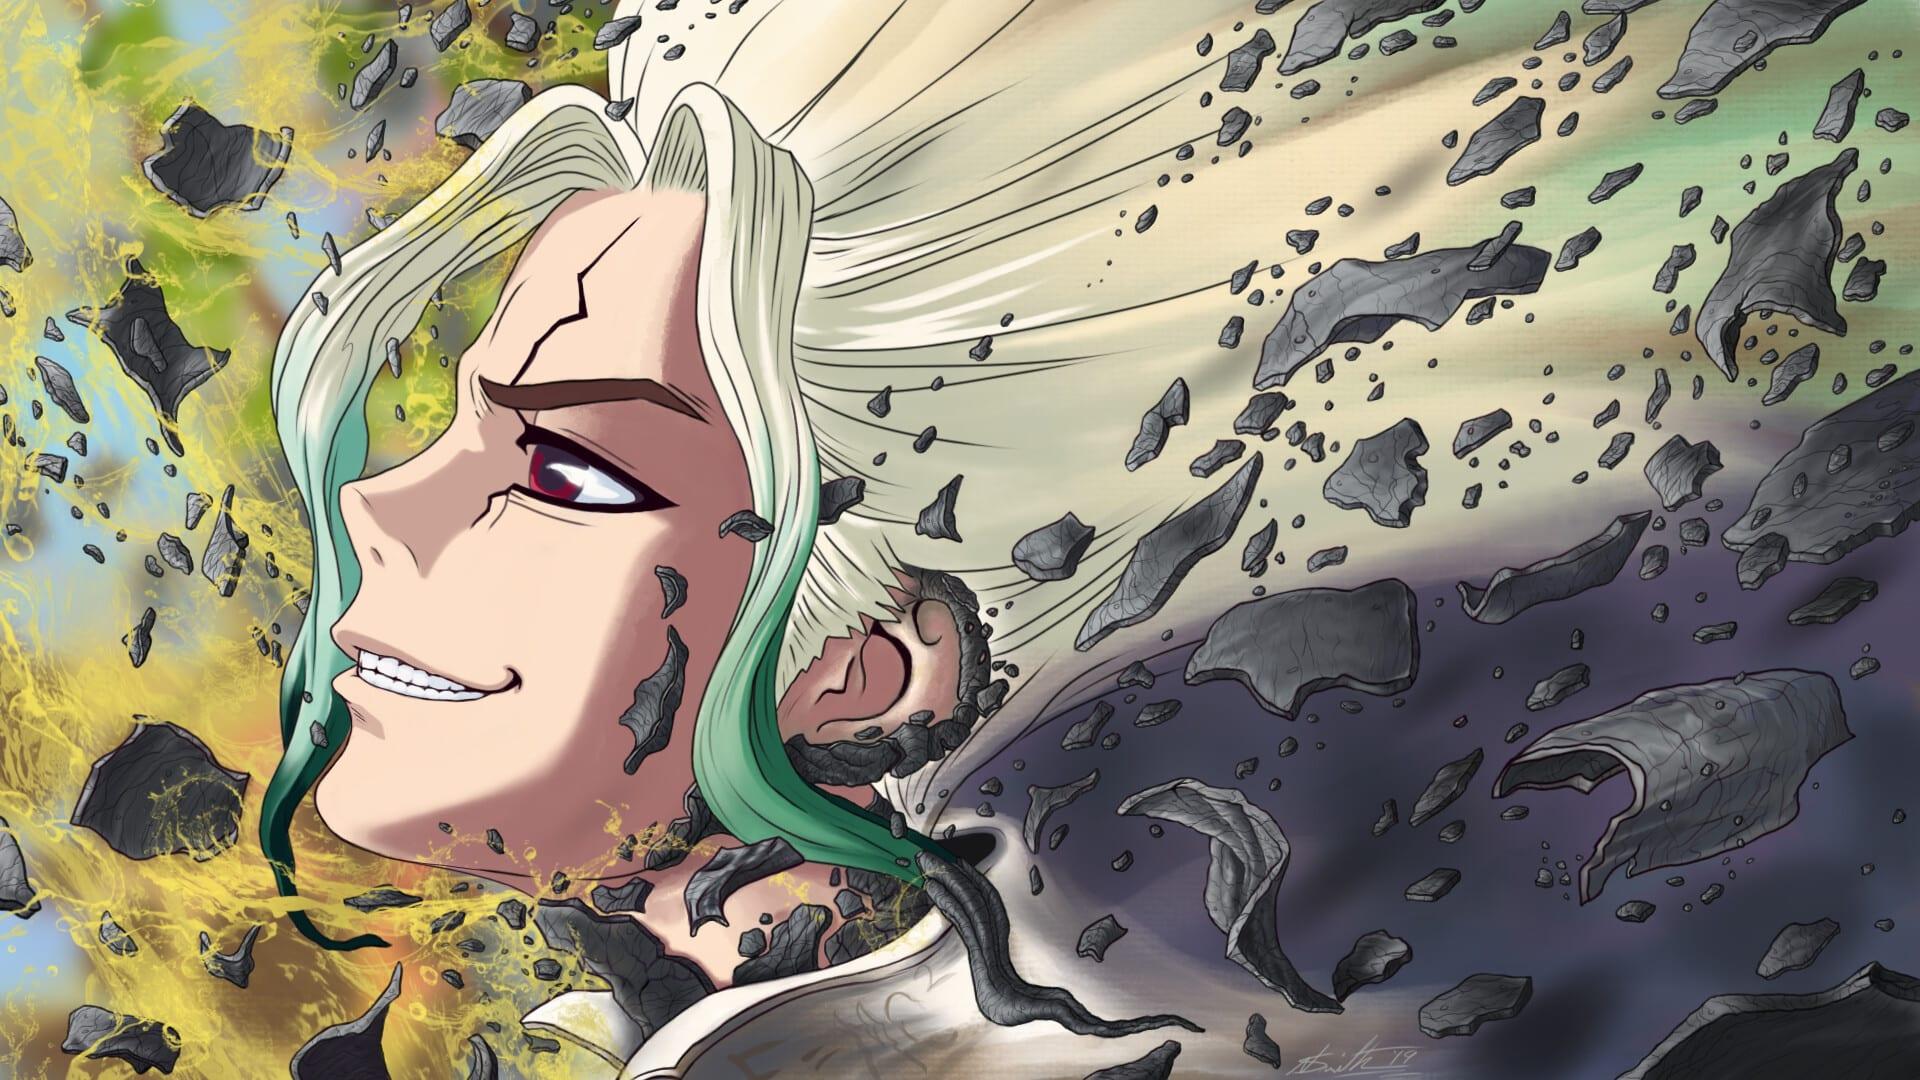 Dr. Stone Episode 15 'The Culmination of Two Million Years